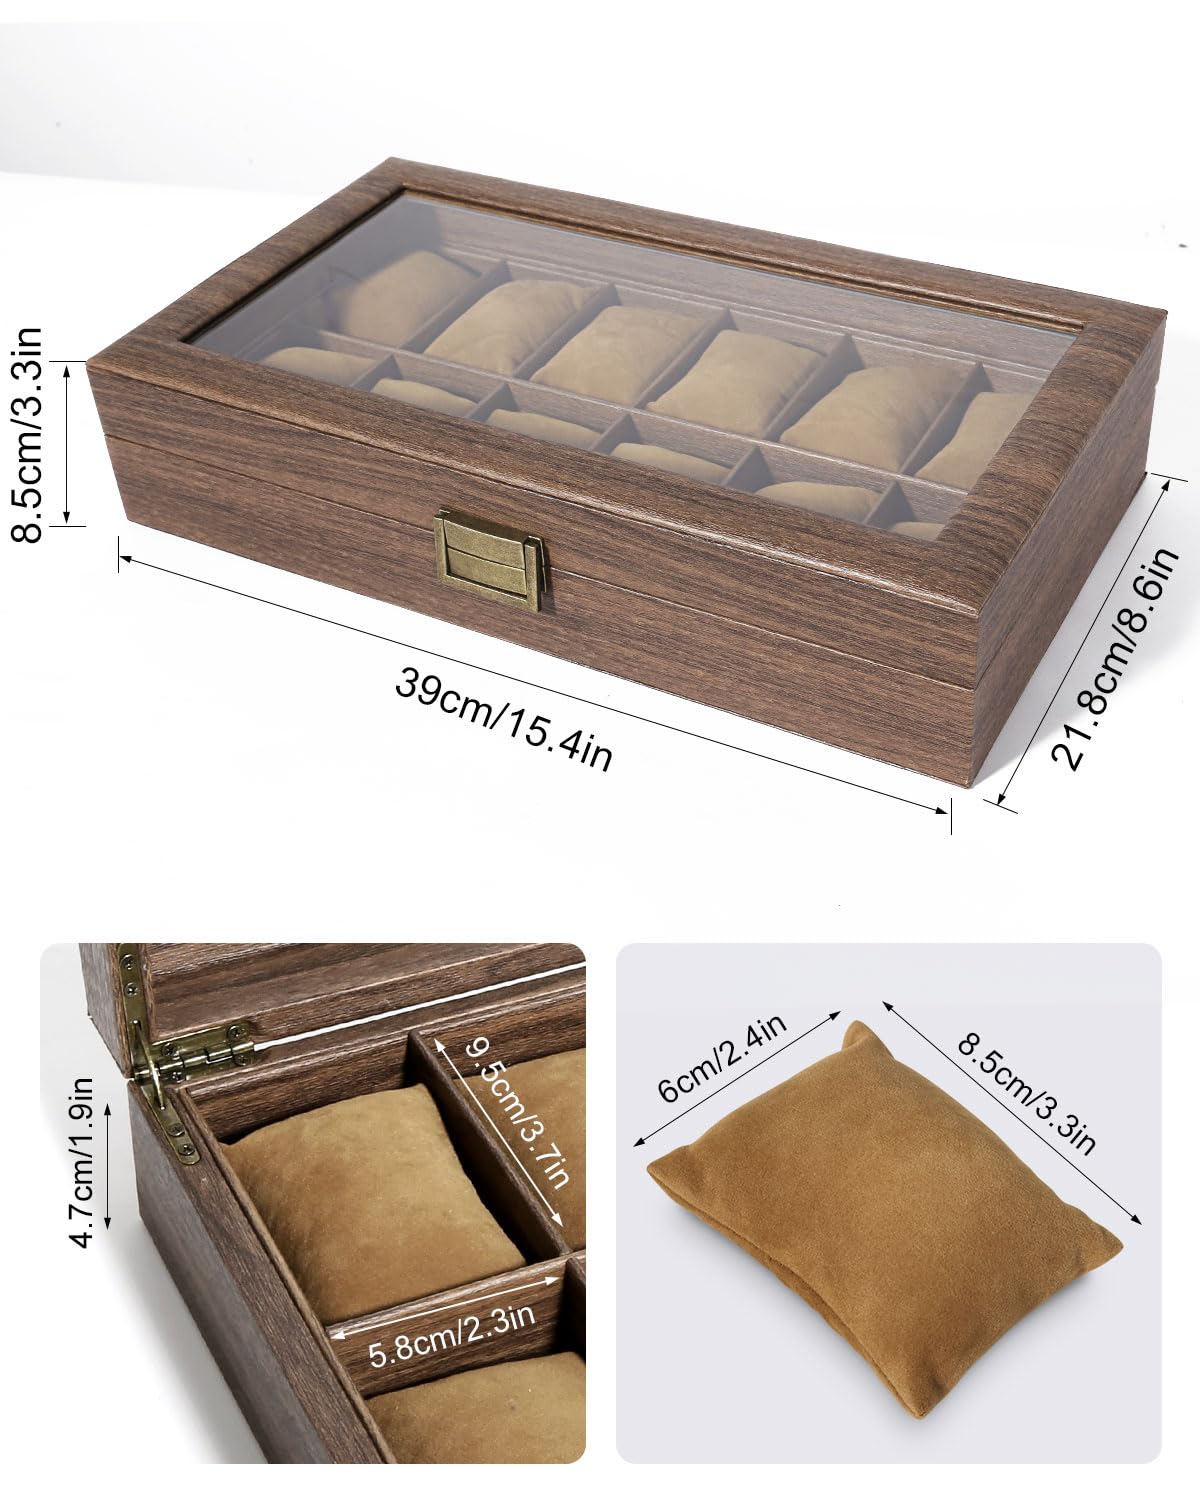 Uten Watch Box 12 Slots, Watch Case Organizer with Real Glass Lid, Wood Grain PU Leather Watch Display Storage Box with Removable Imitation Suede Watch Pillows, Metal Clasp, Gift for Men and Women